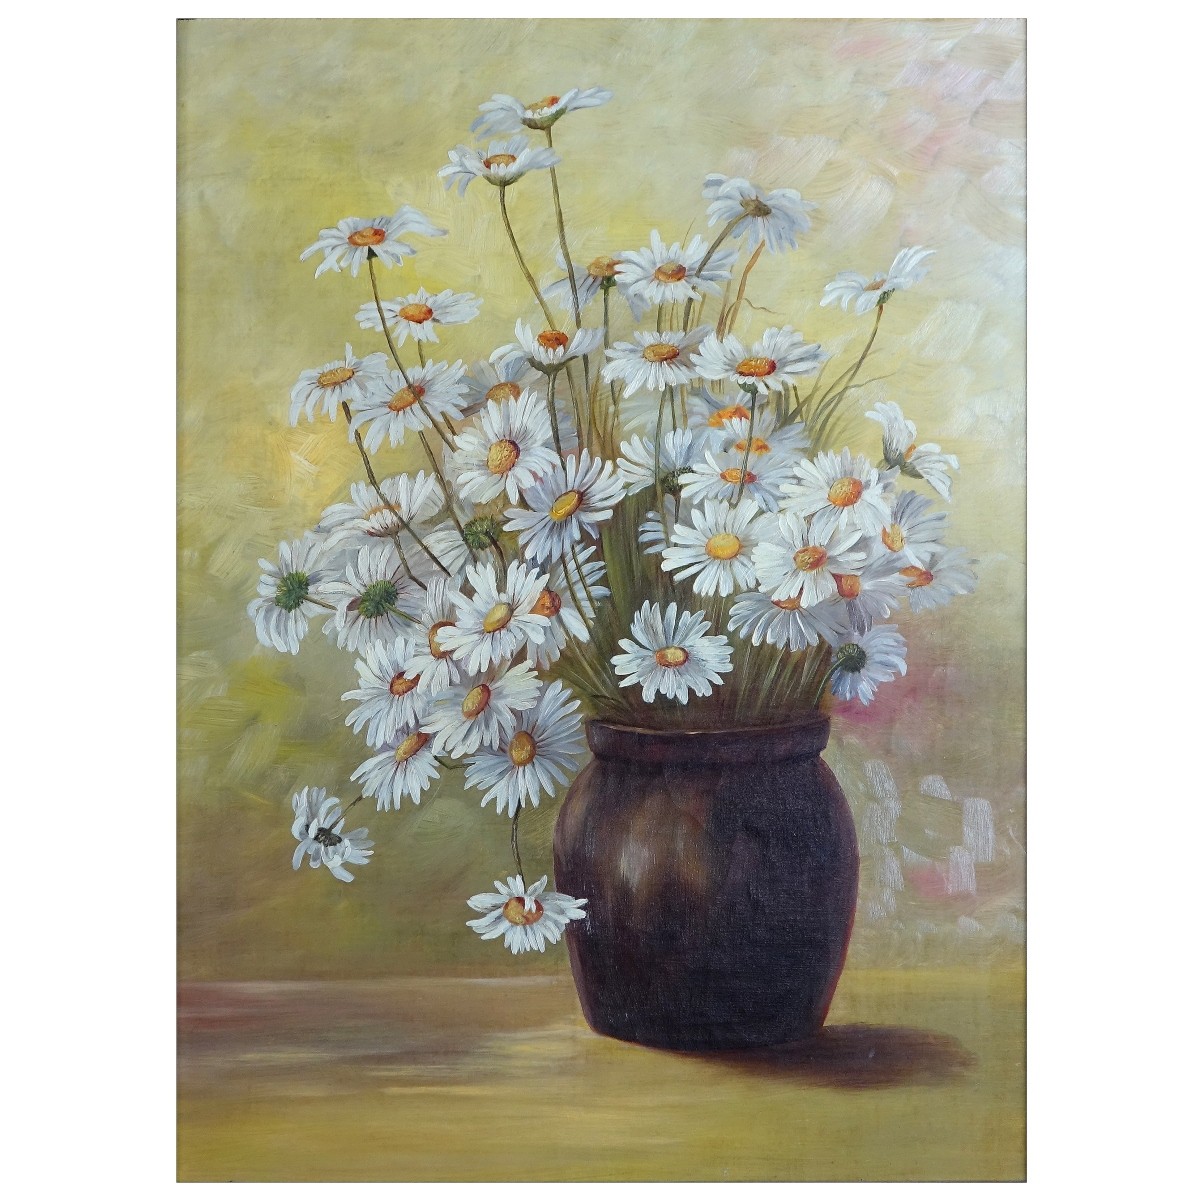 Antique Oil on Canvas "Still Life Daisies"